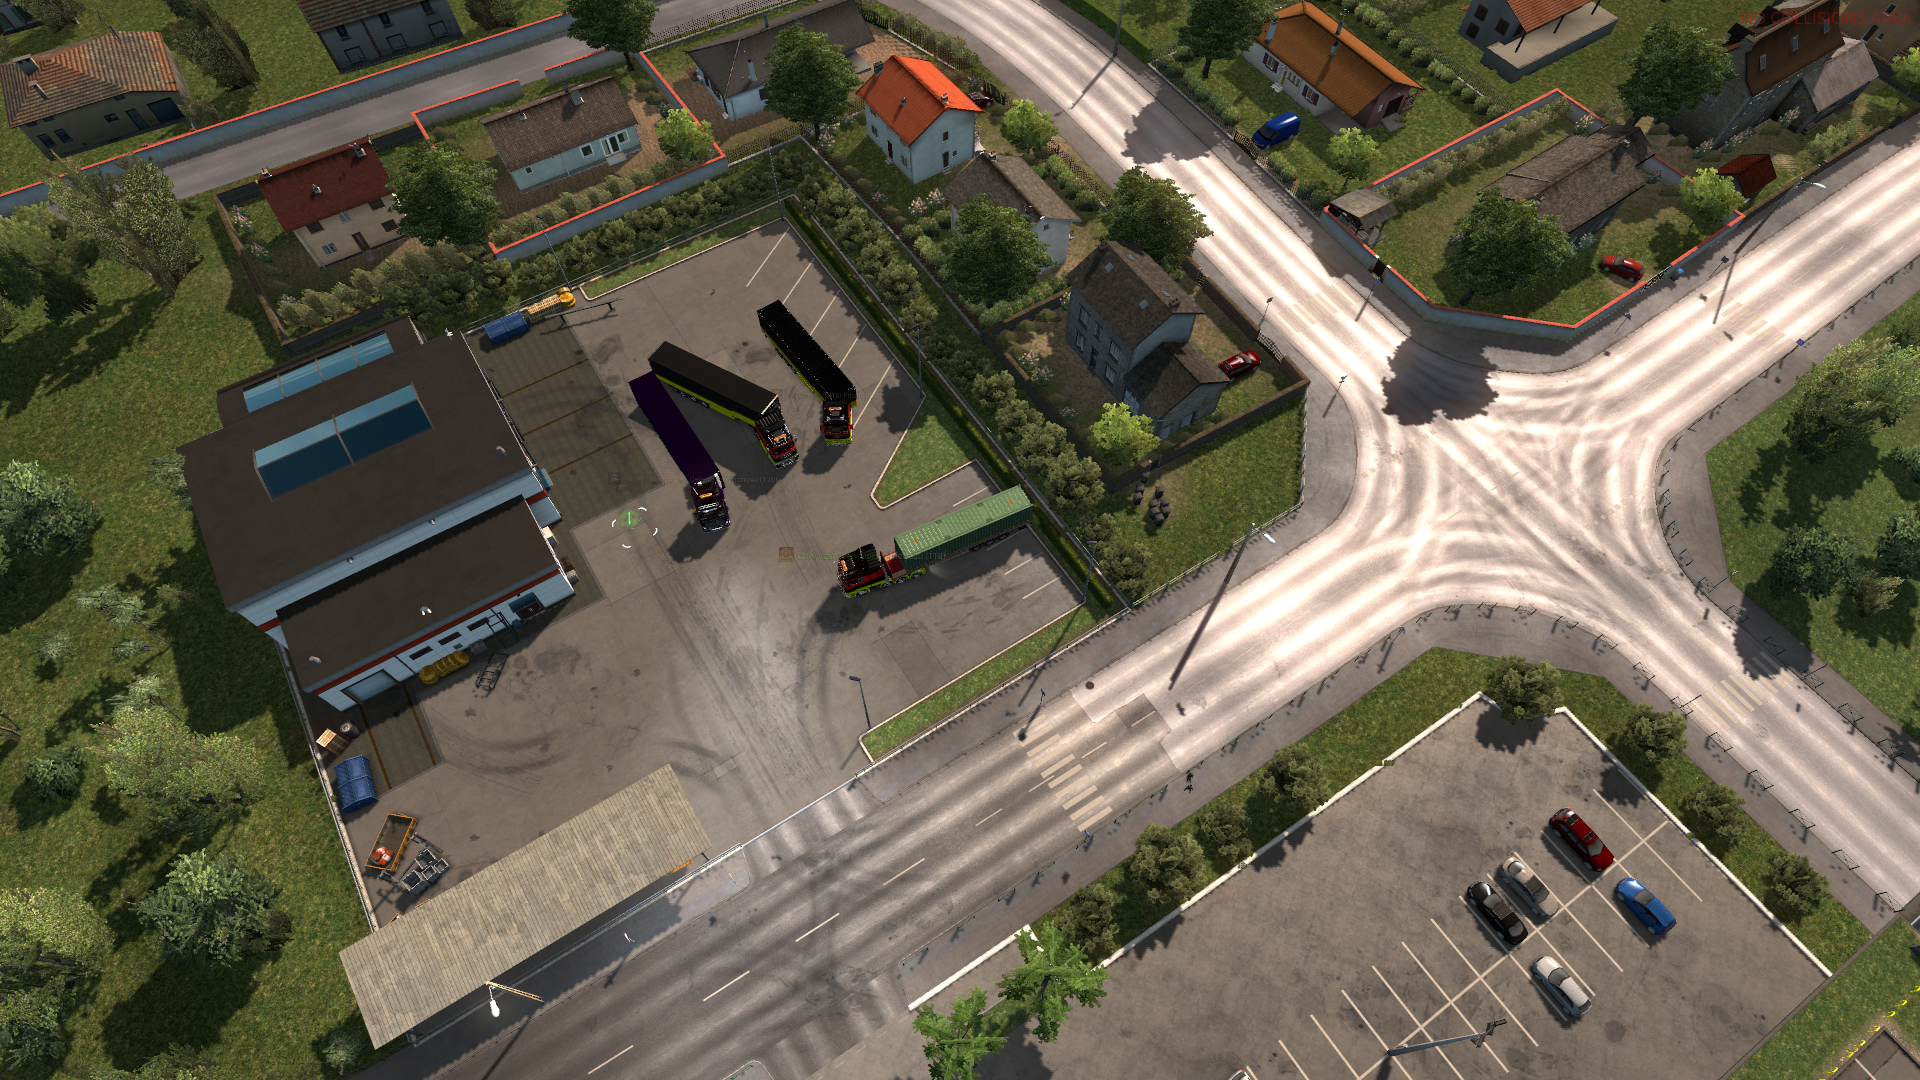 ets2_20190419_235437_00.png